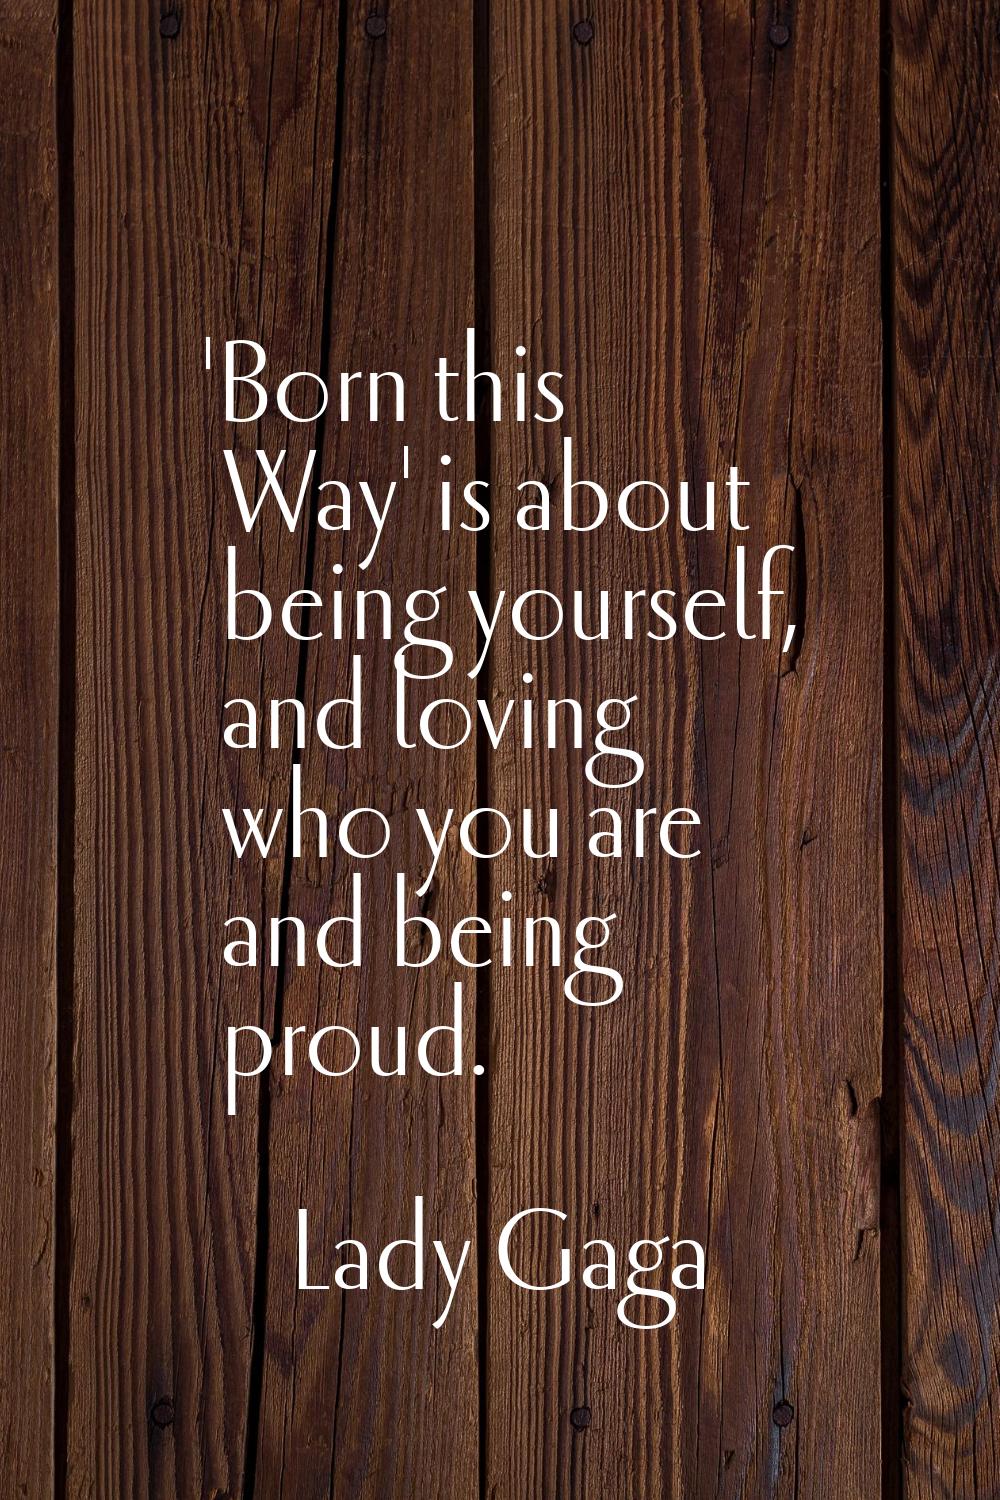 'Born this Way' is about being yourself, and loving who you are and being proud.